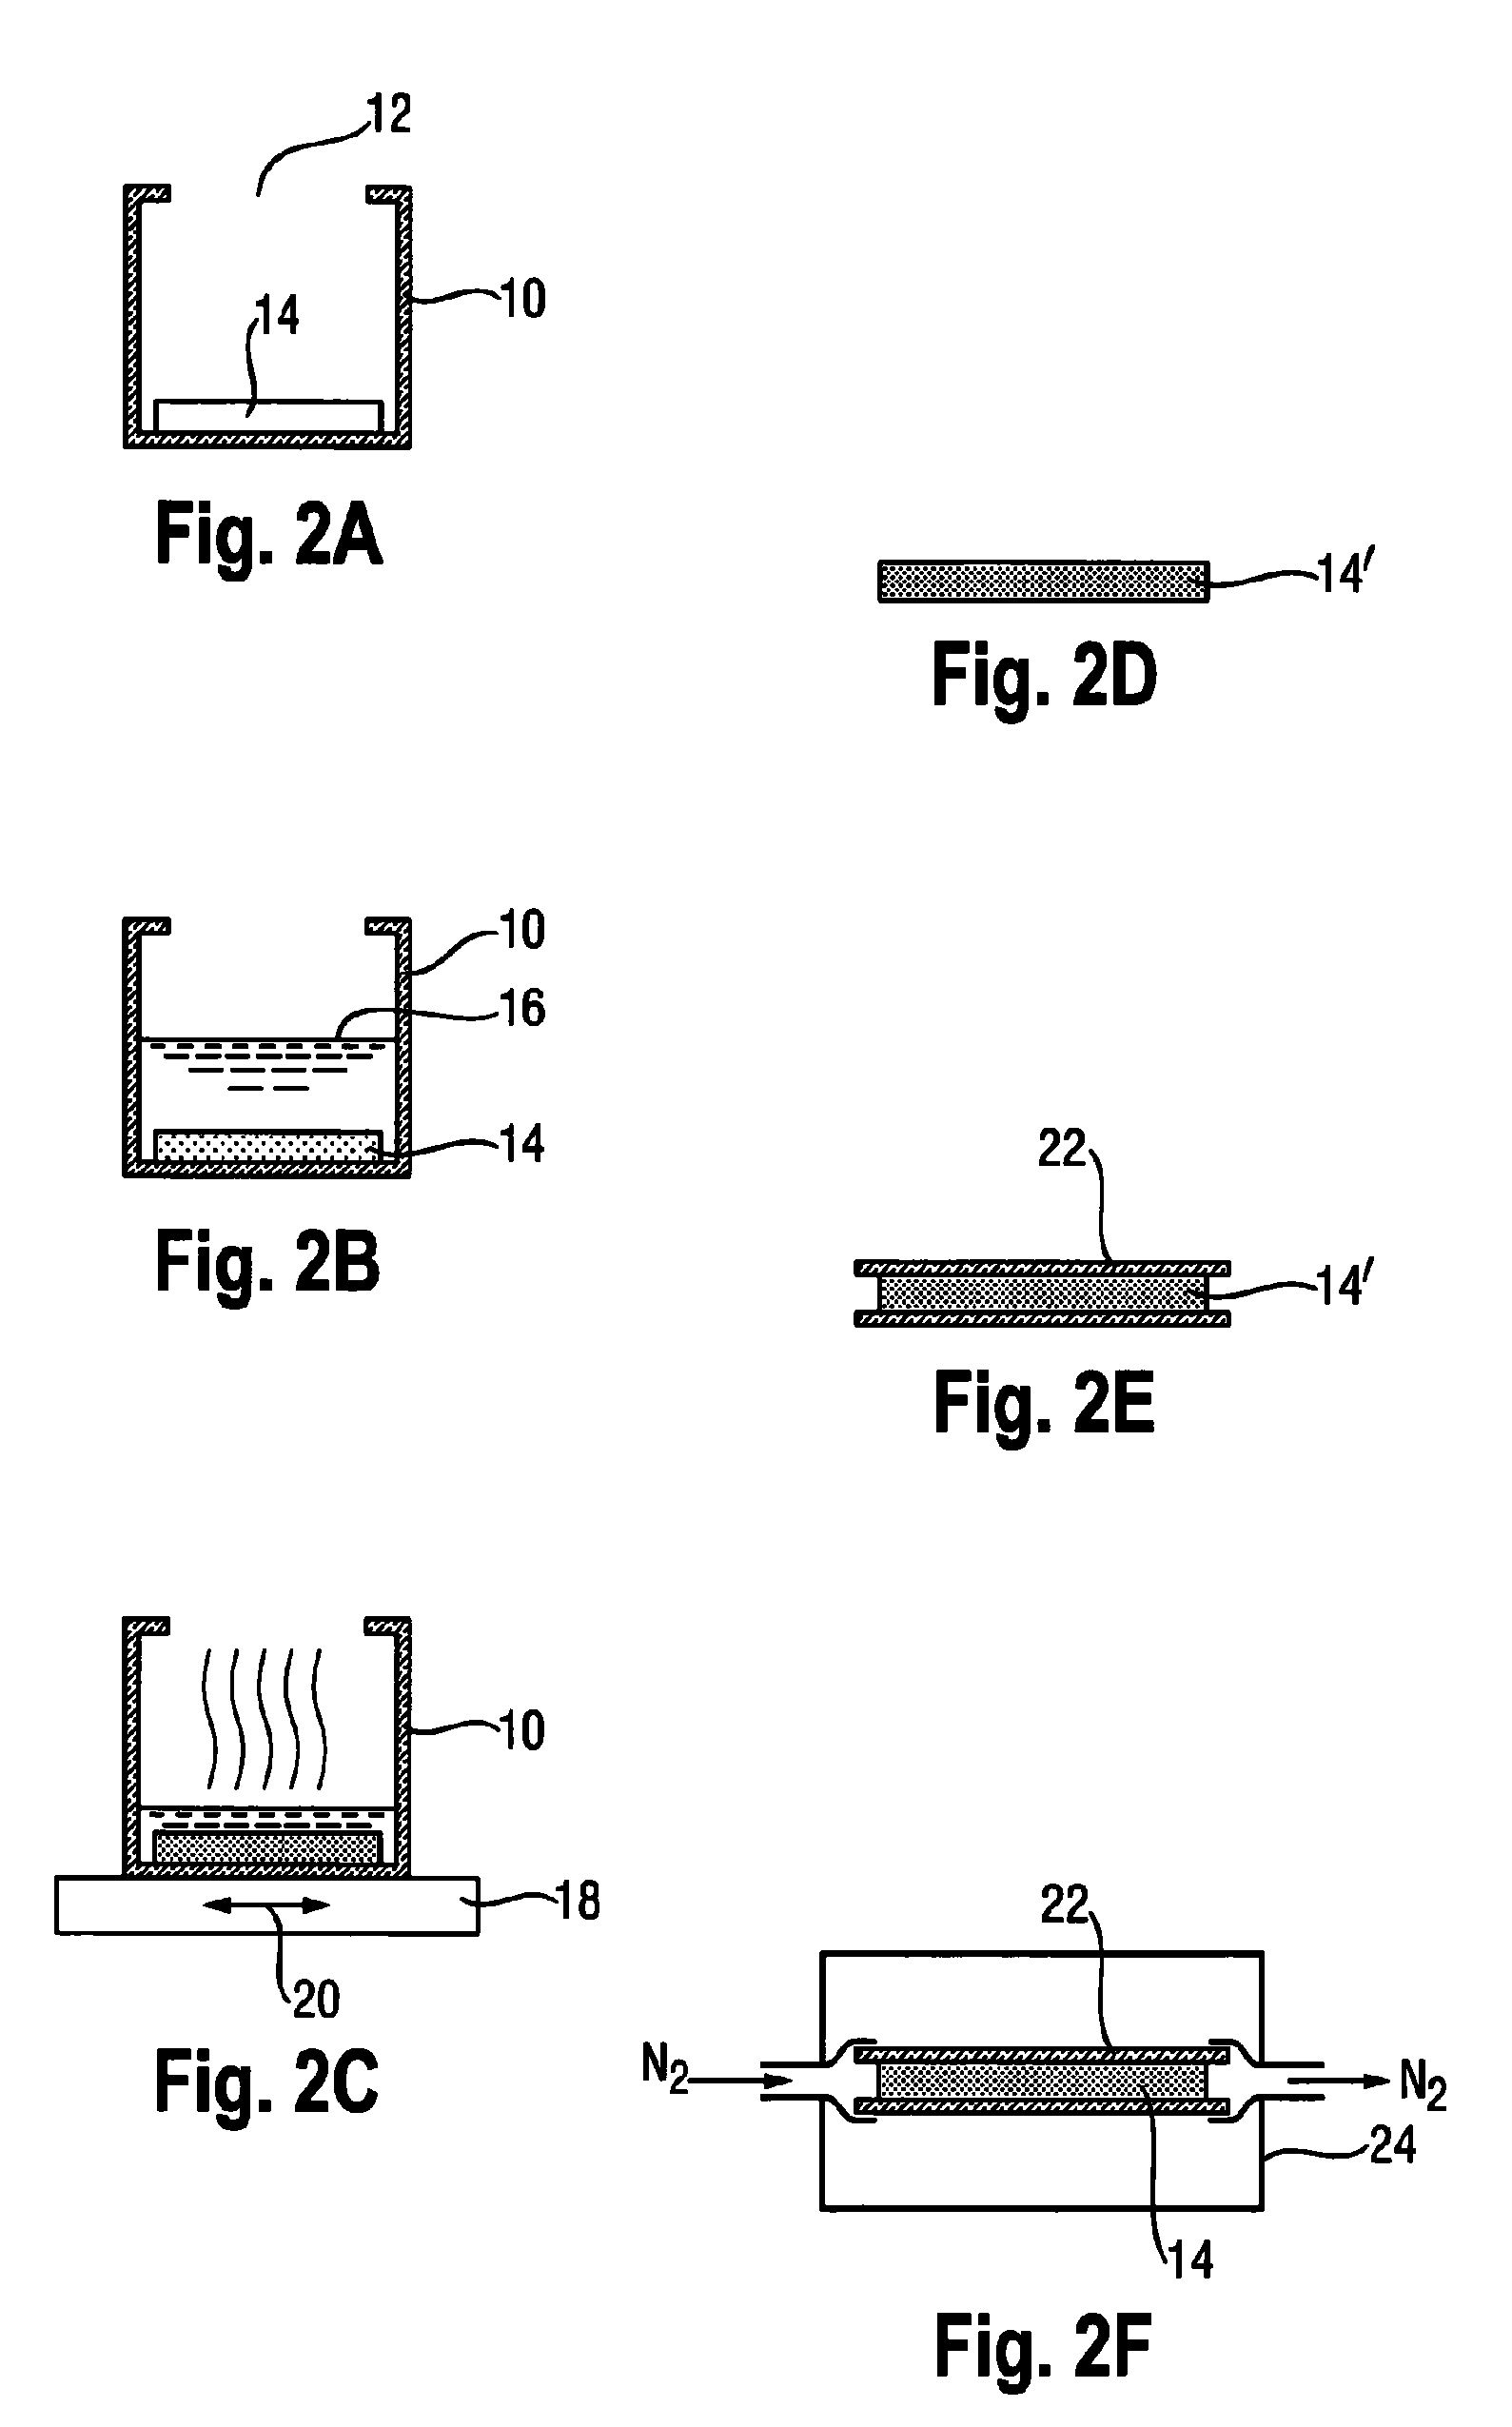 Porous carbon electrode with conductive polymer coating